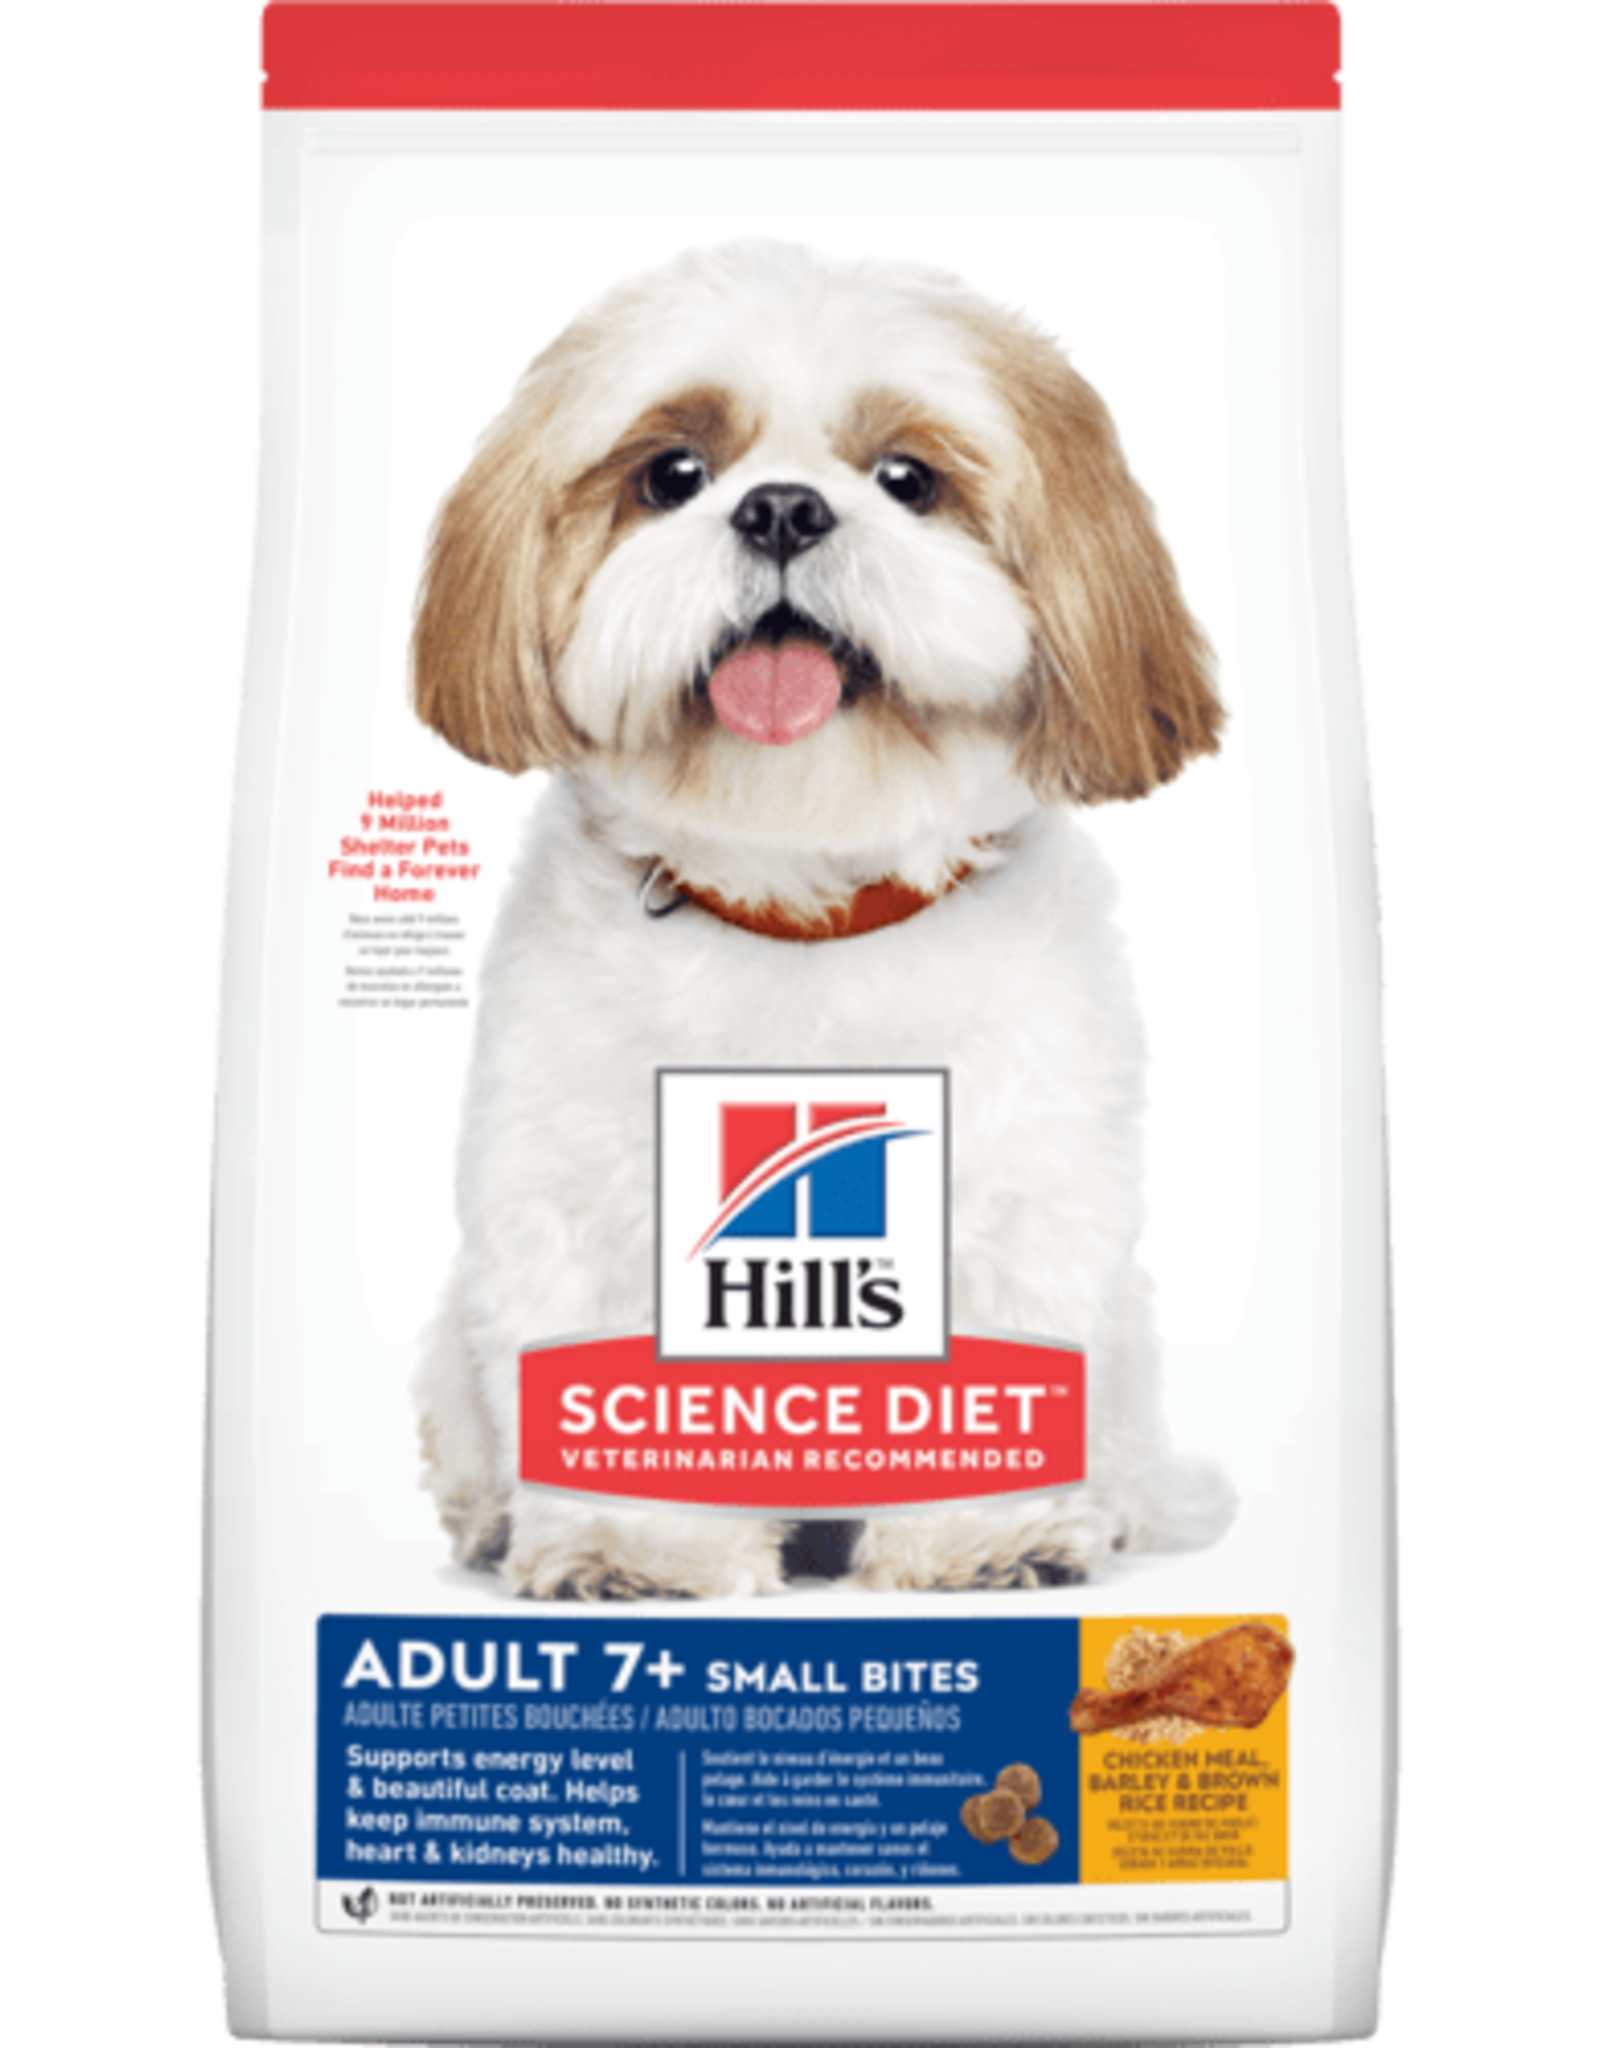 SCIENCE DIET HILL'S SCIENCE DIET CANINE MATURE SMALL BITES 33LBS